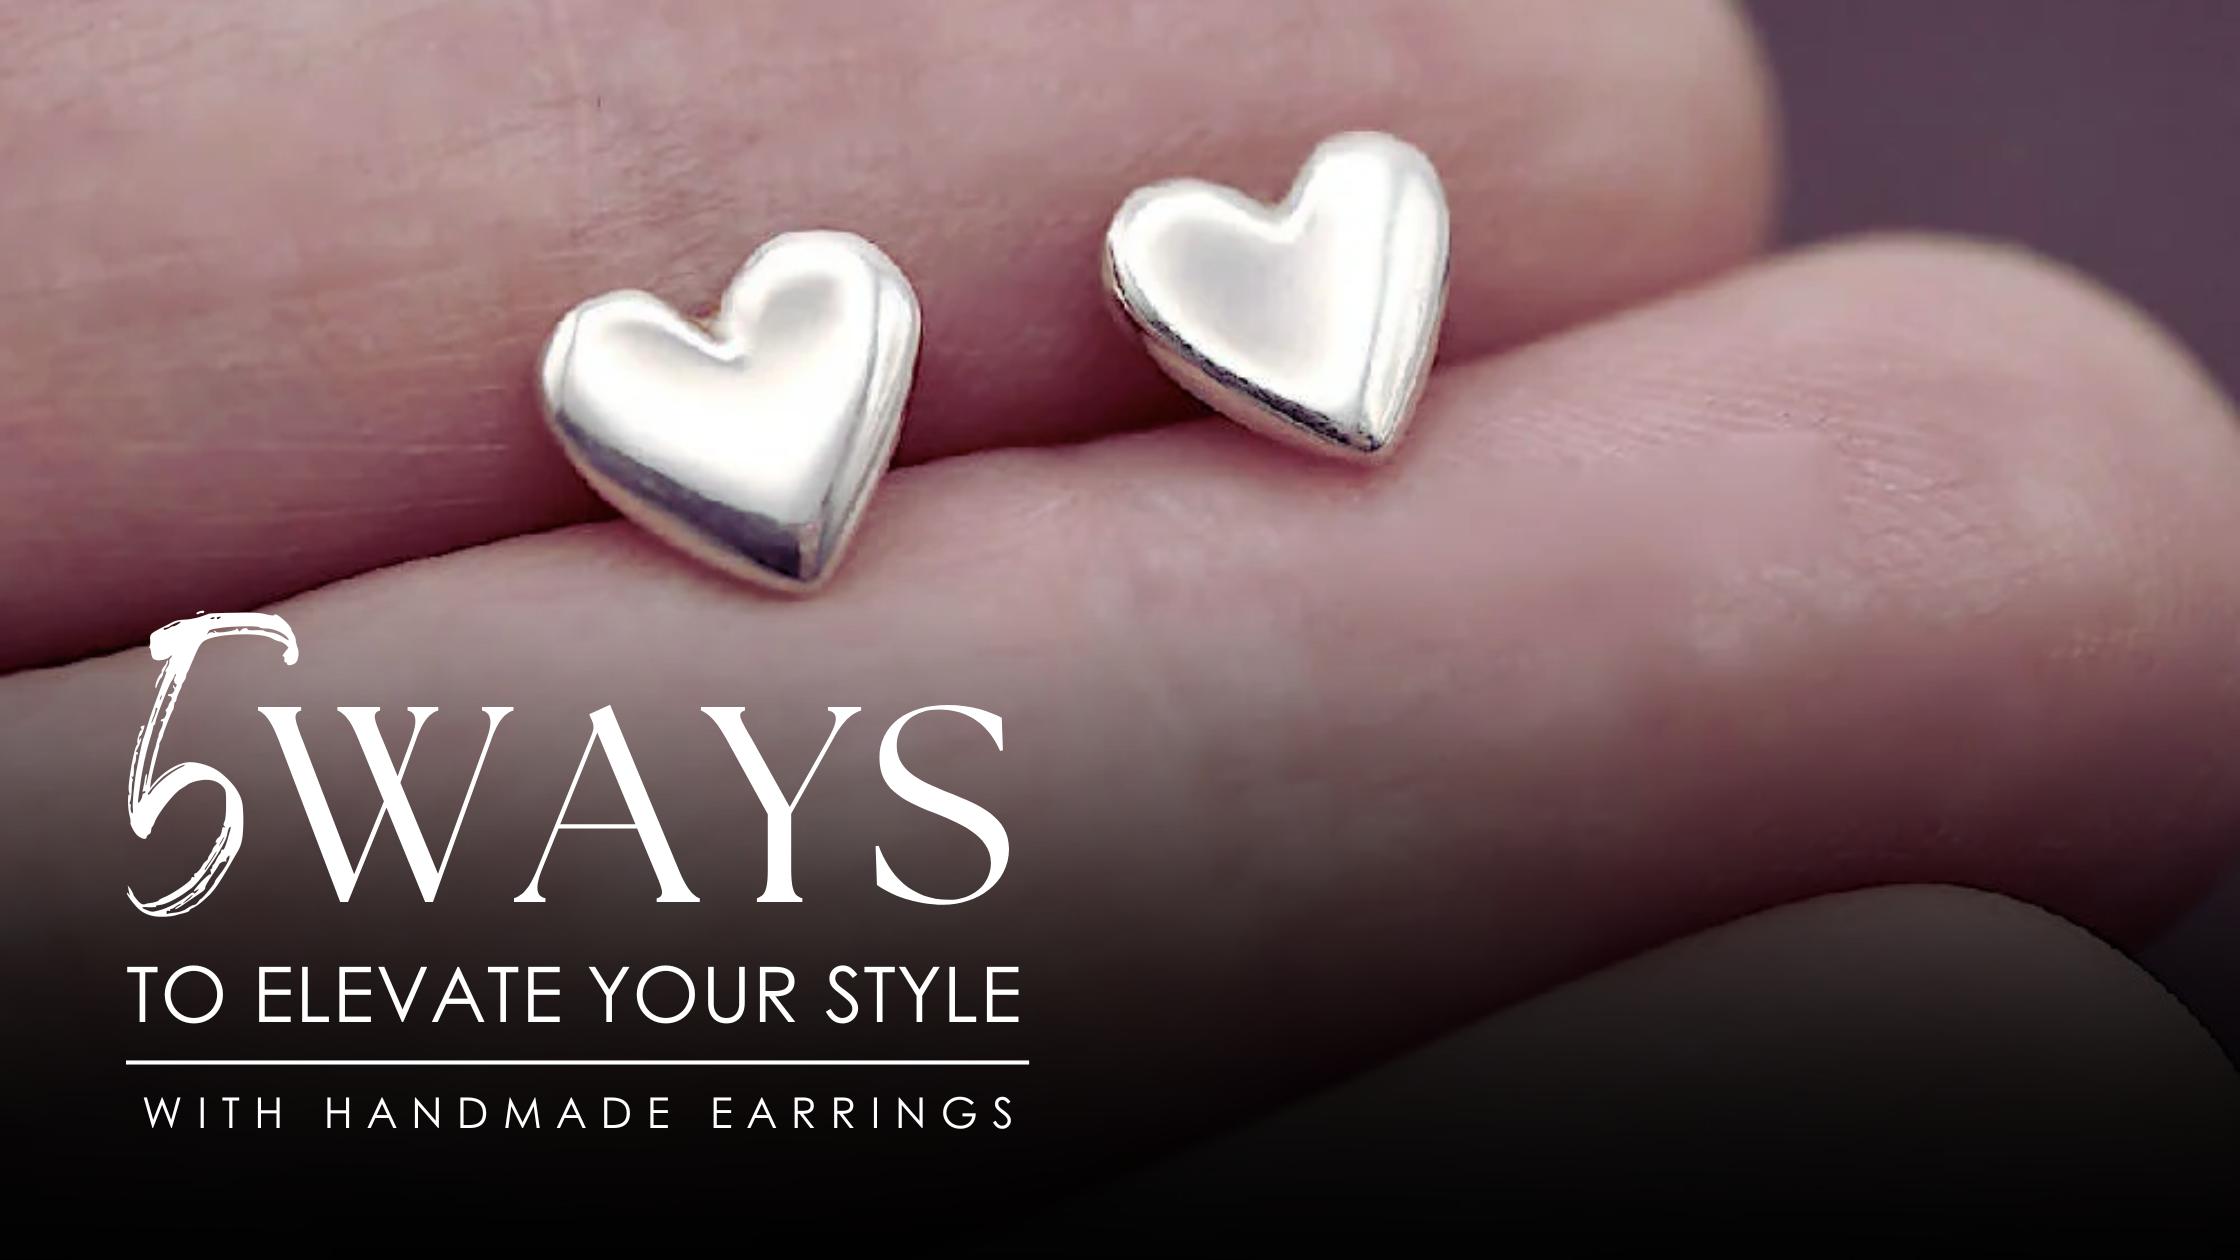 5 Ways to Elevate Your Style with Handmade Earrings